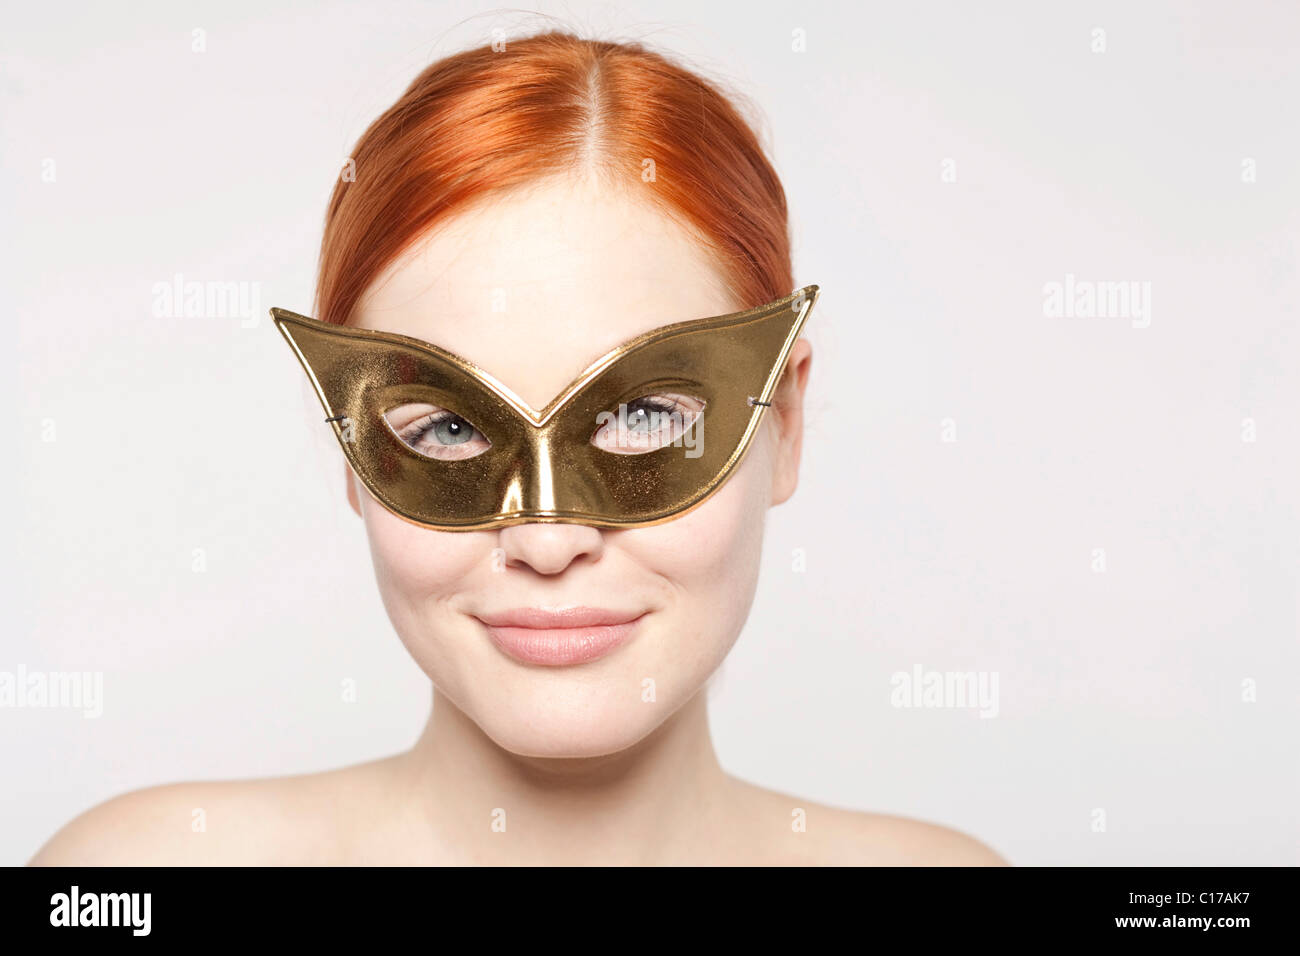 Young red-haired woman wearing a golden mask Stock Photo